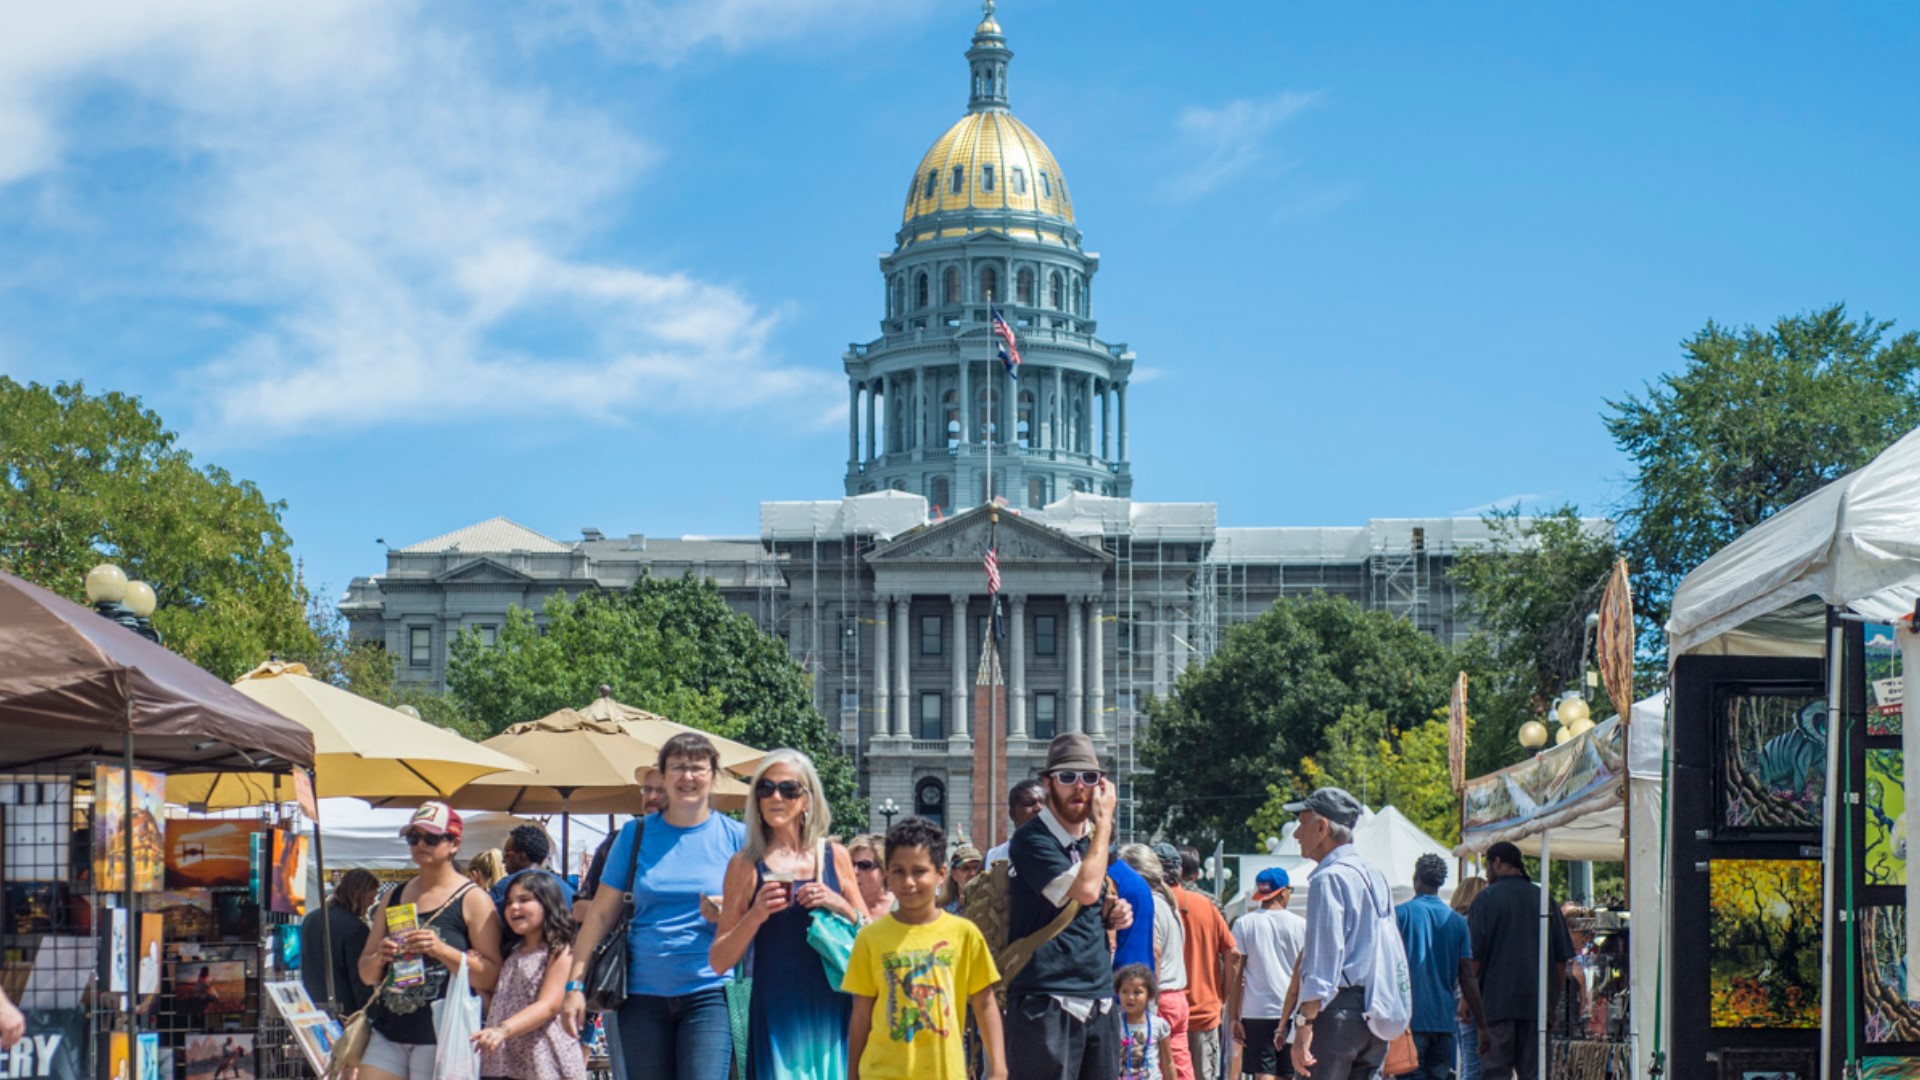 A Taste of Colorado returning to downtown Denver in 2021